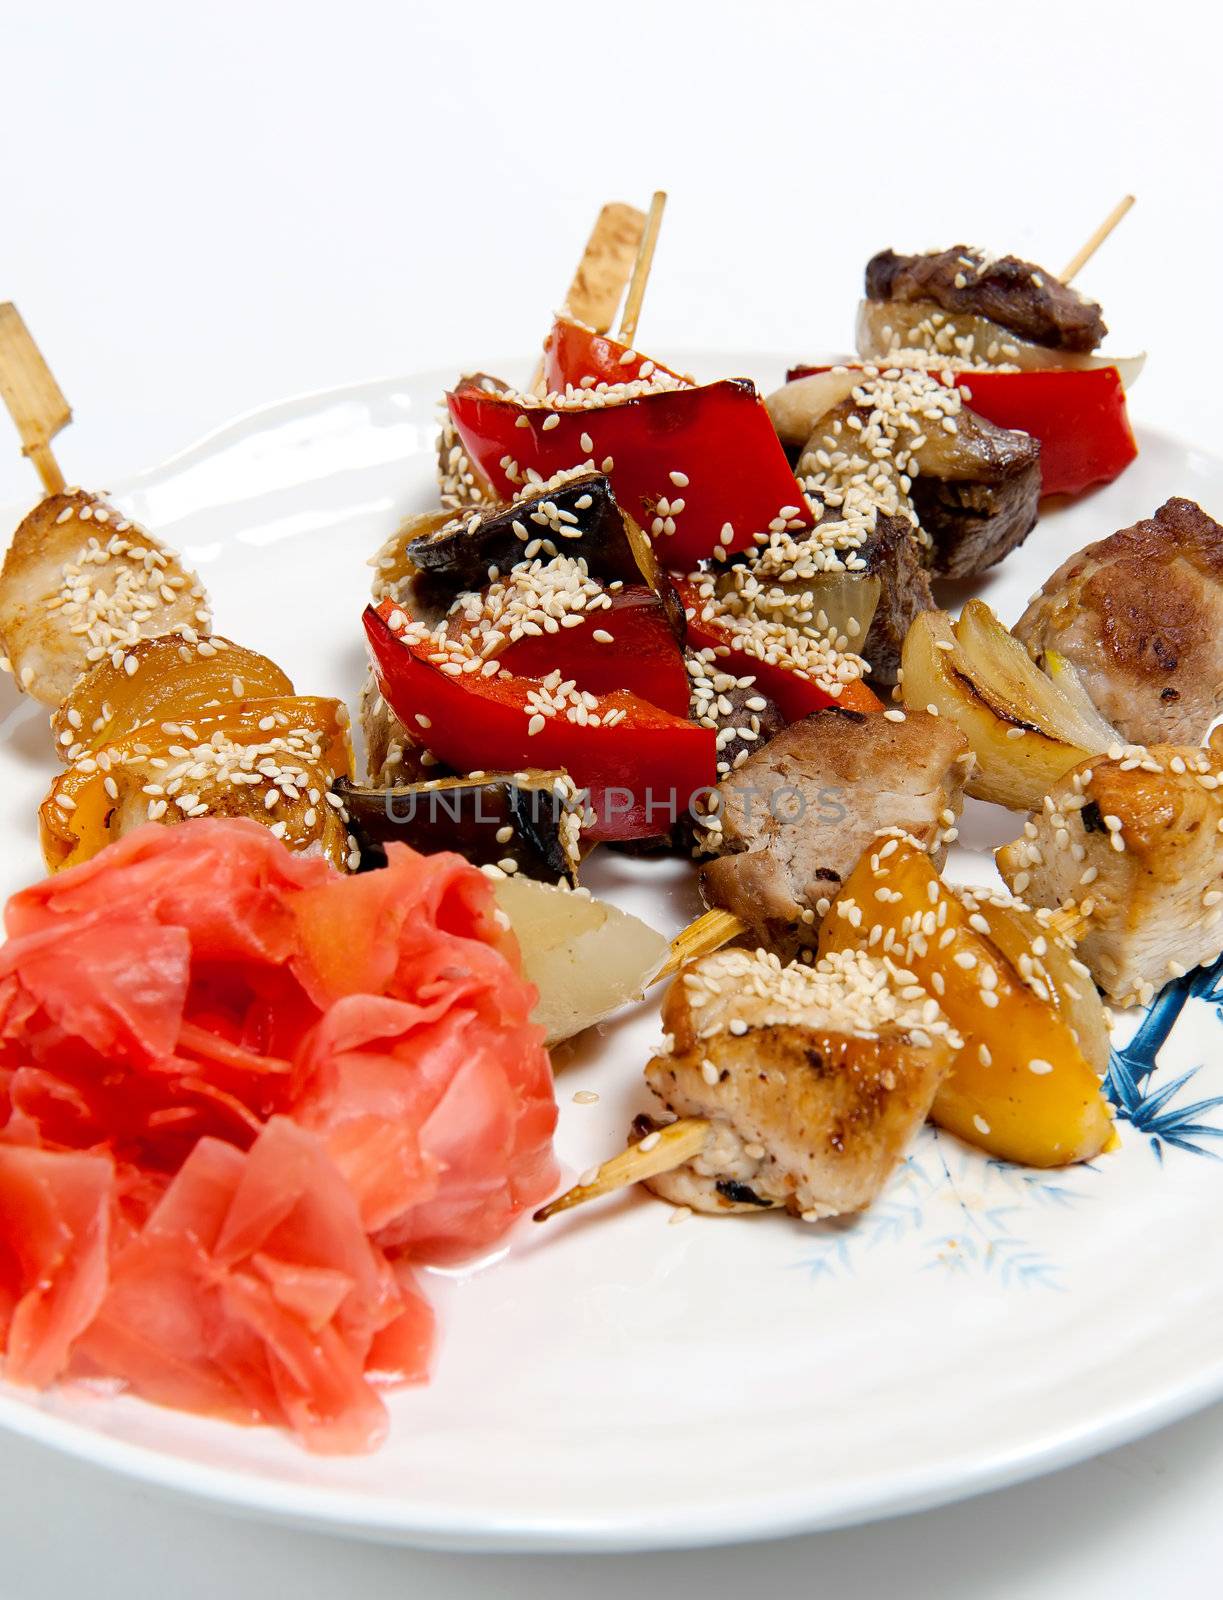 Meat skewers on a plate isolated on white background